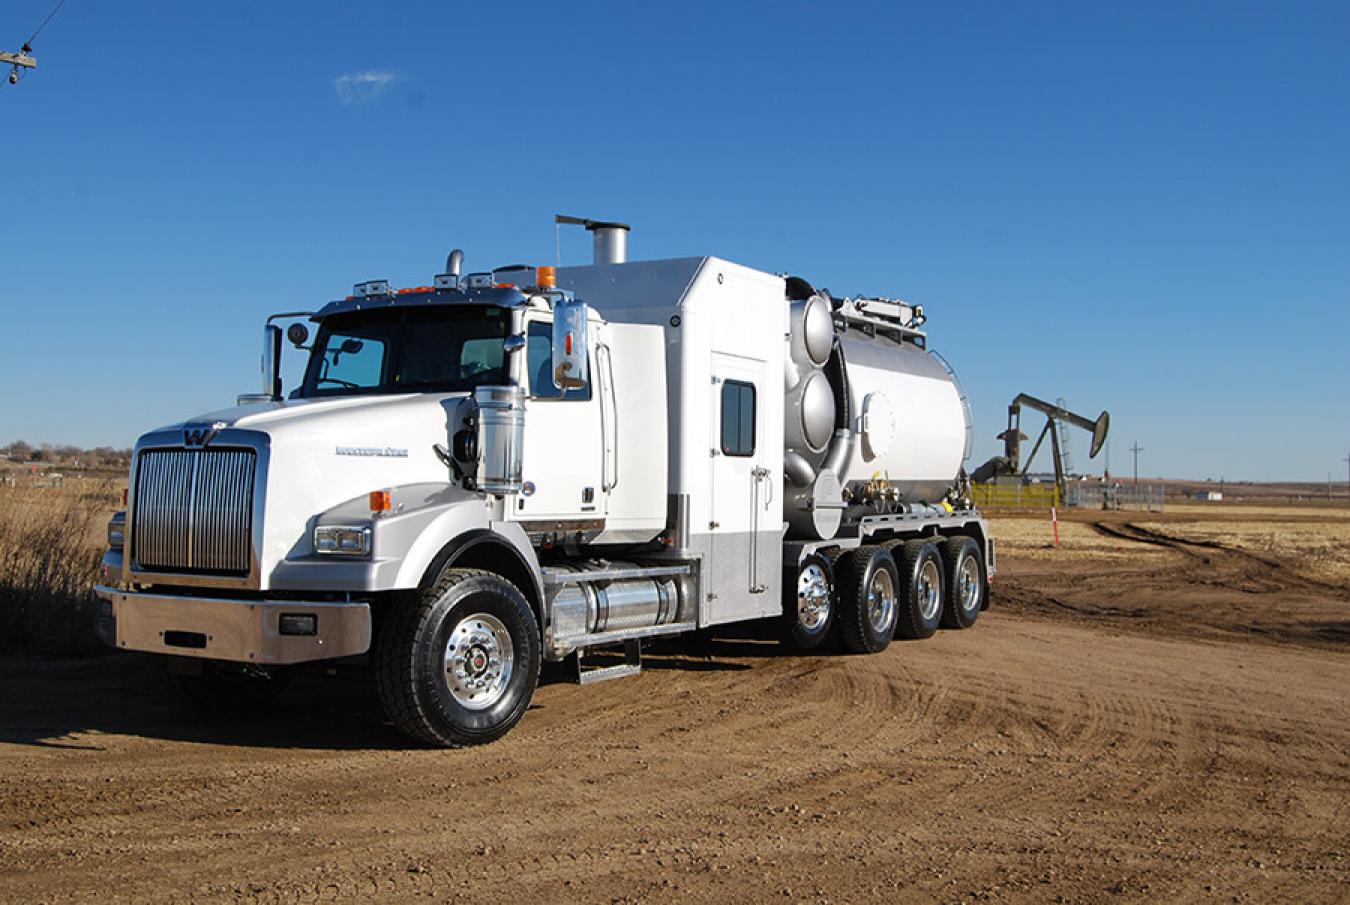 White and grey Foremost hydrovac truck in front of an oil derrick